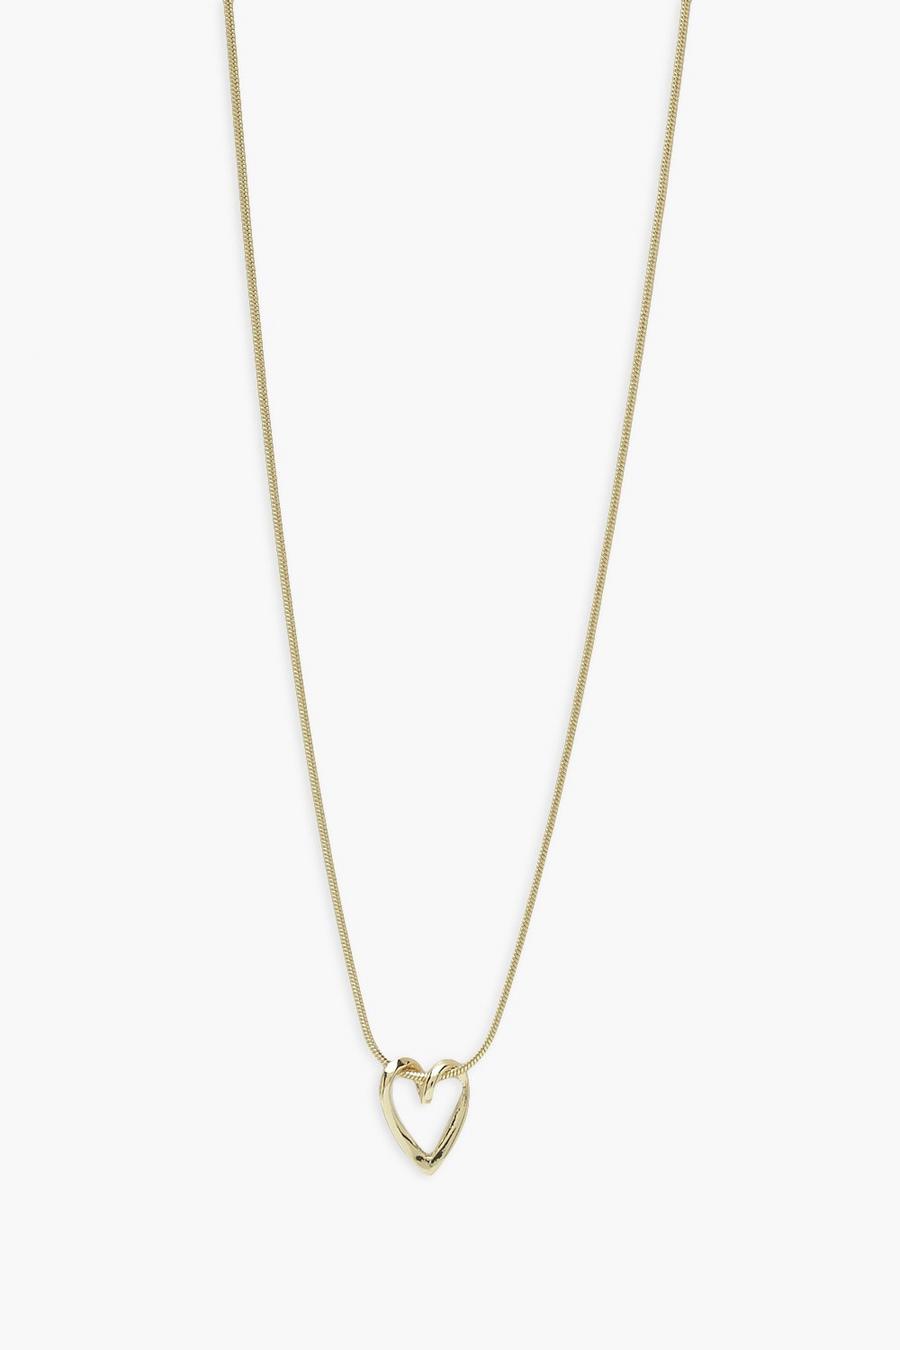 Real Gold Plated Delicate Heart Necklace